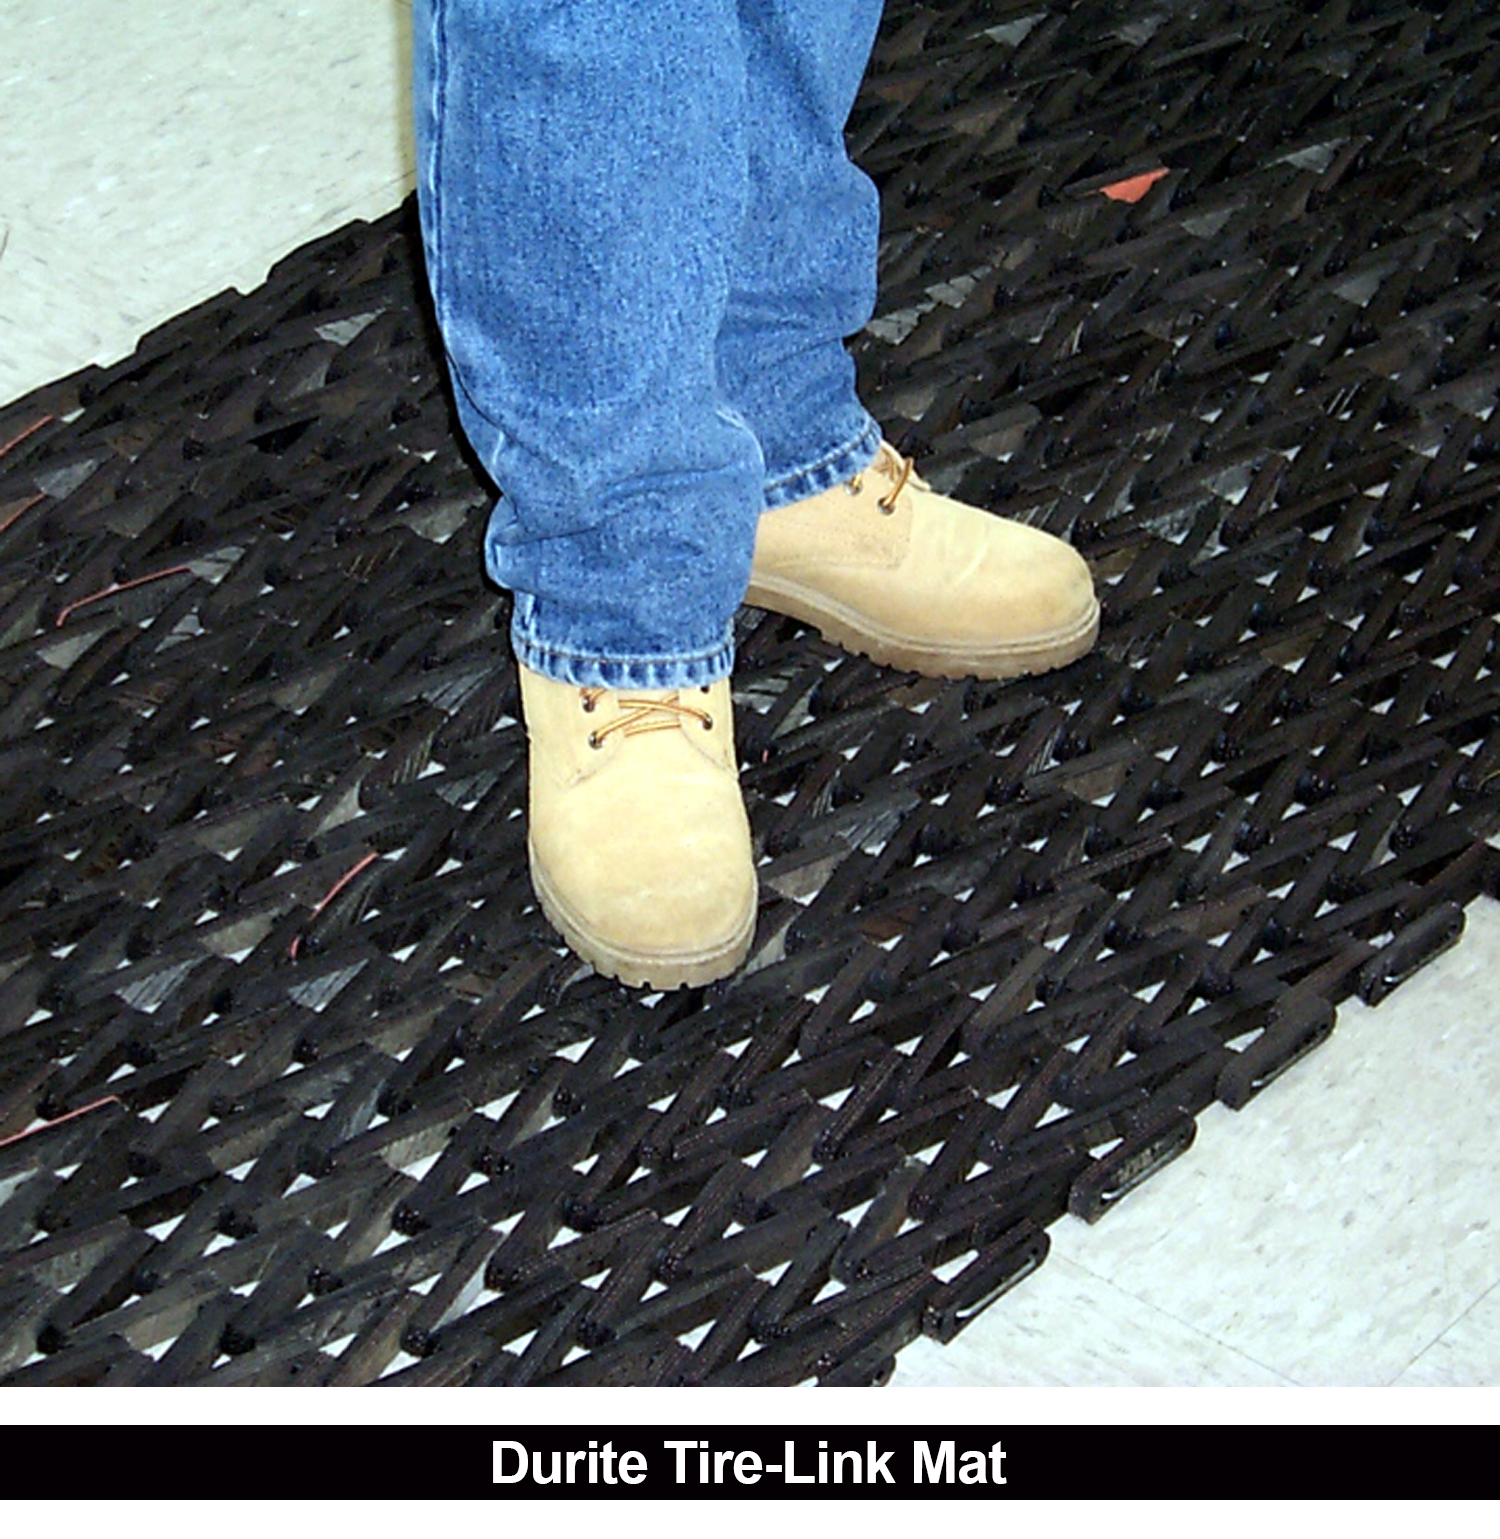 What Floor Mats Should I Buy: Retail/Cashiers  Industrial Rubber  Anti-Fatigue Mats, Dock Bumpers, Wheel Chocks